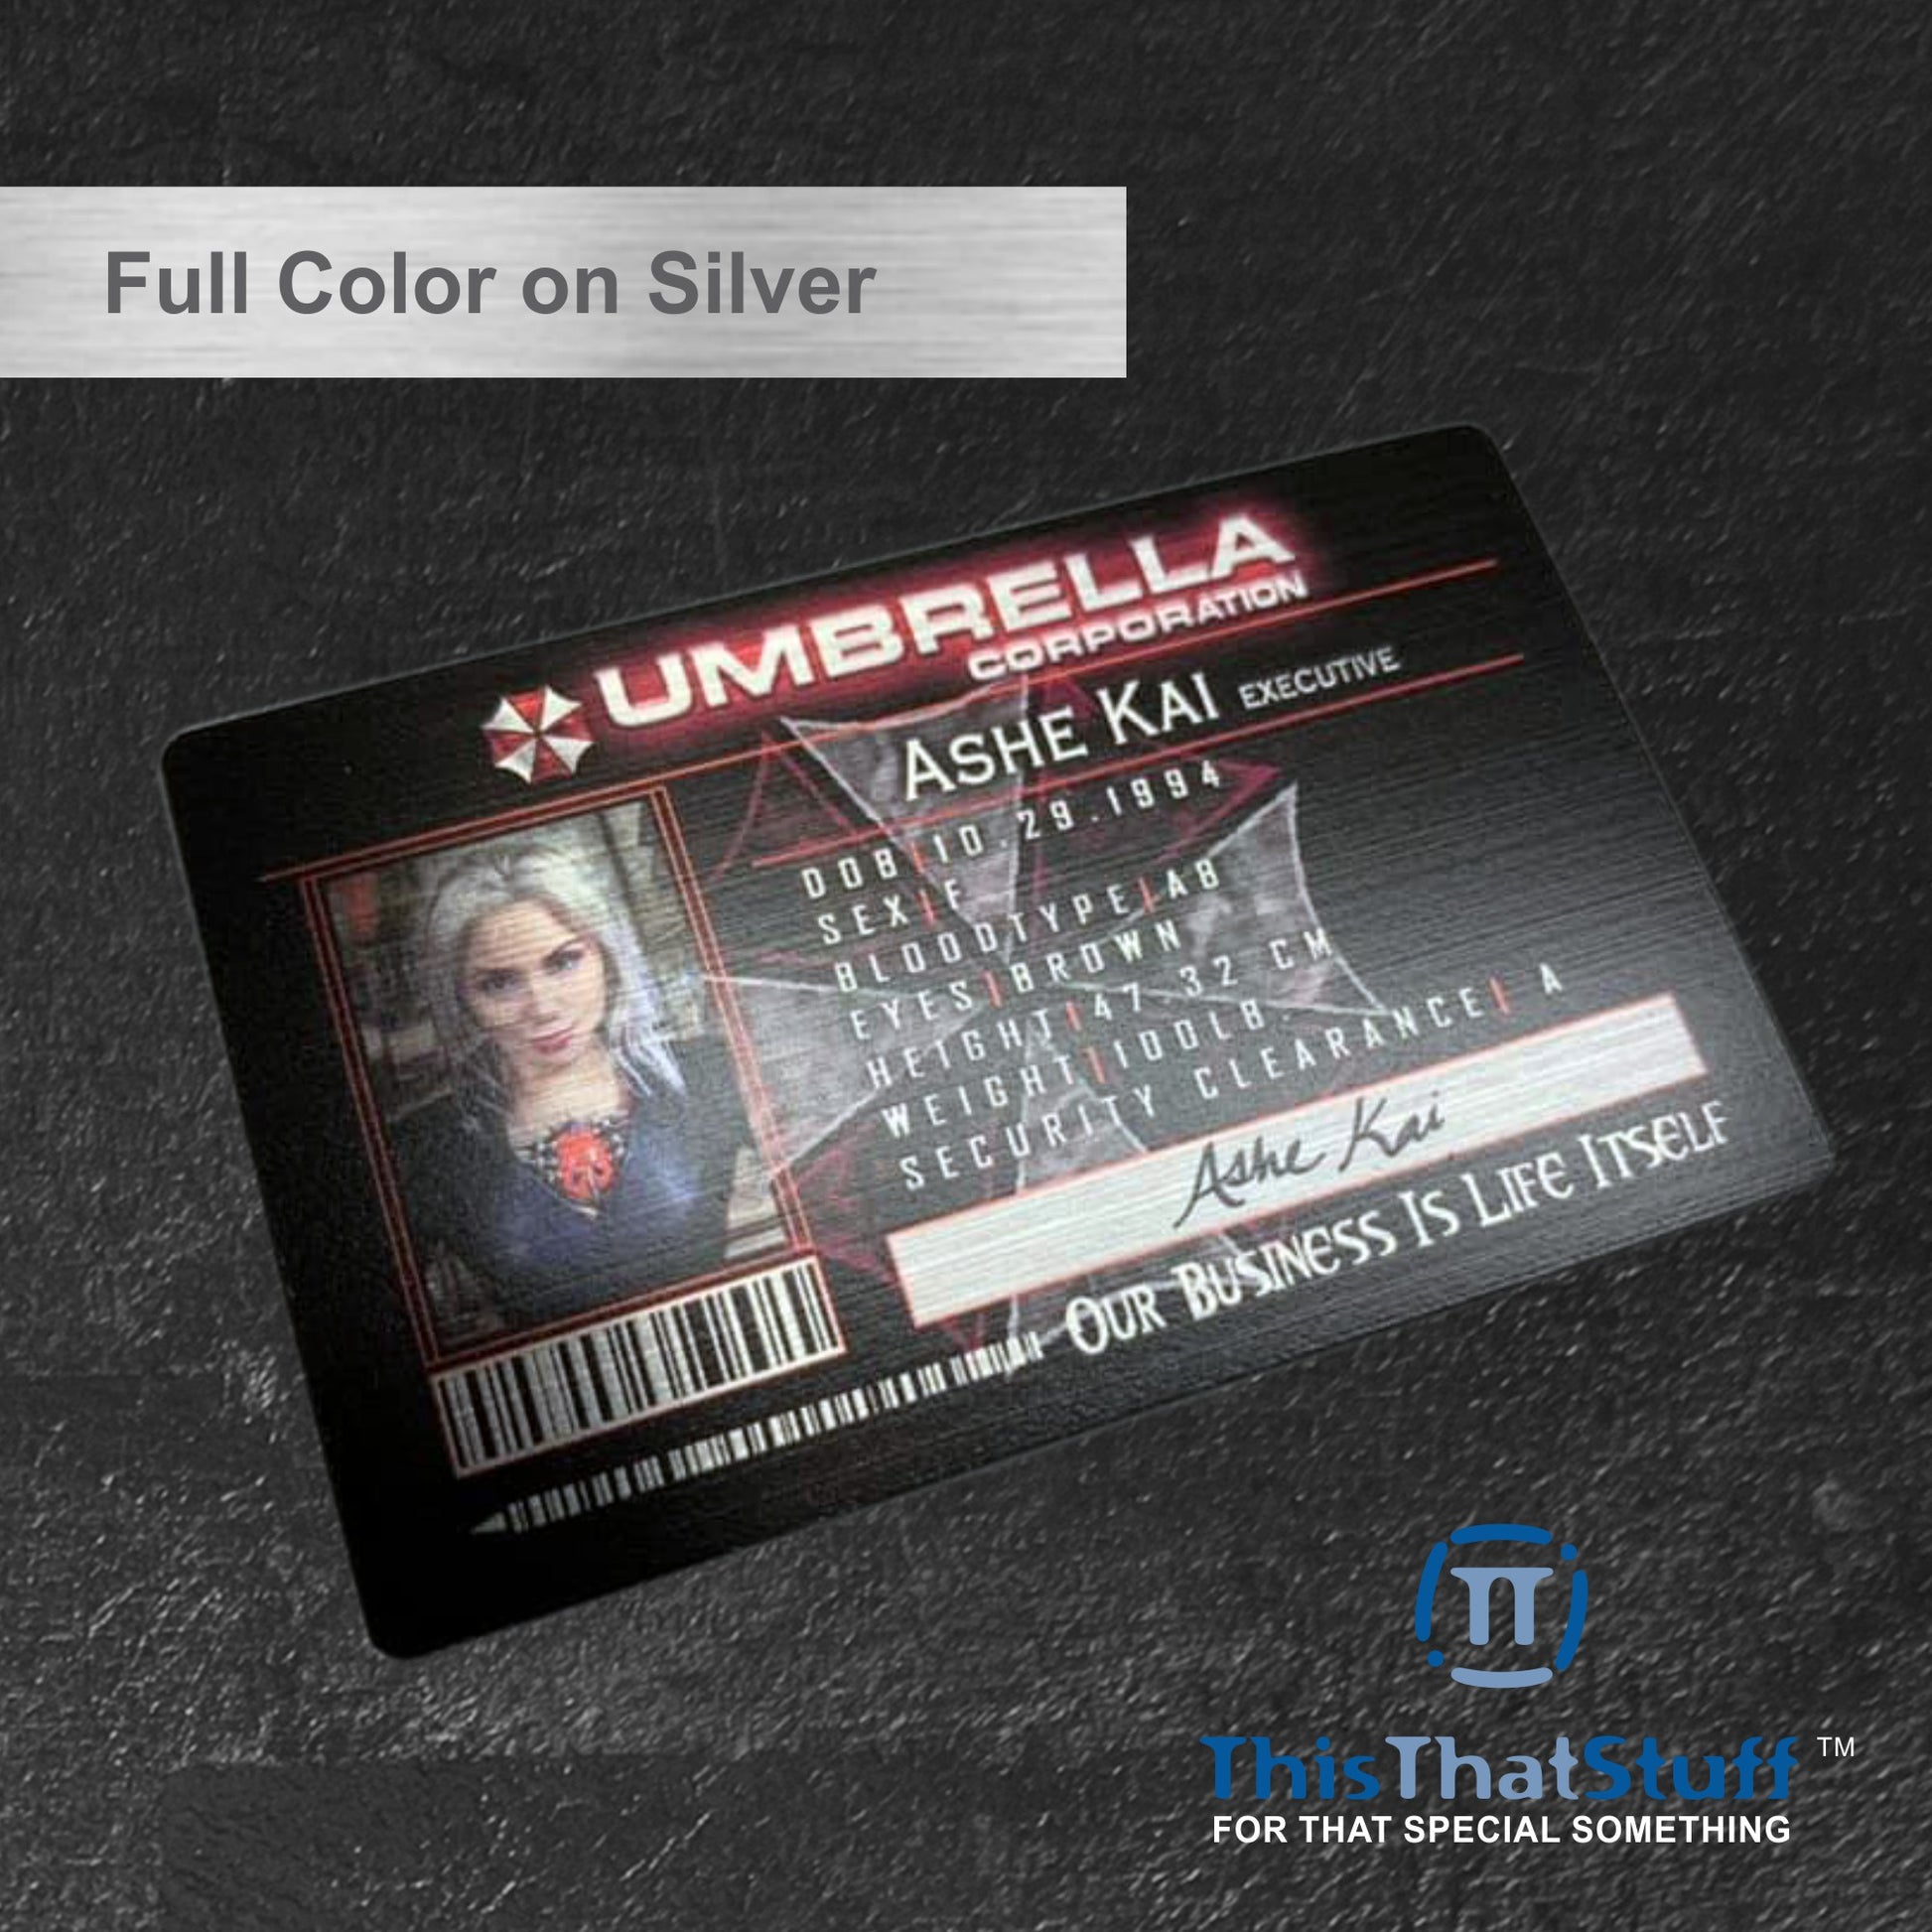 Print METAL ID cards ONLINE TODAY